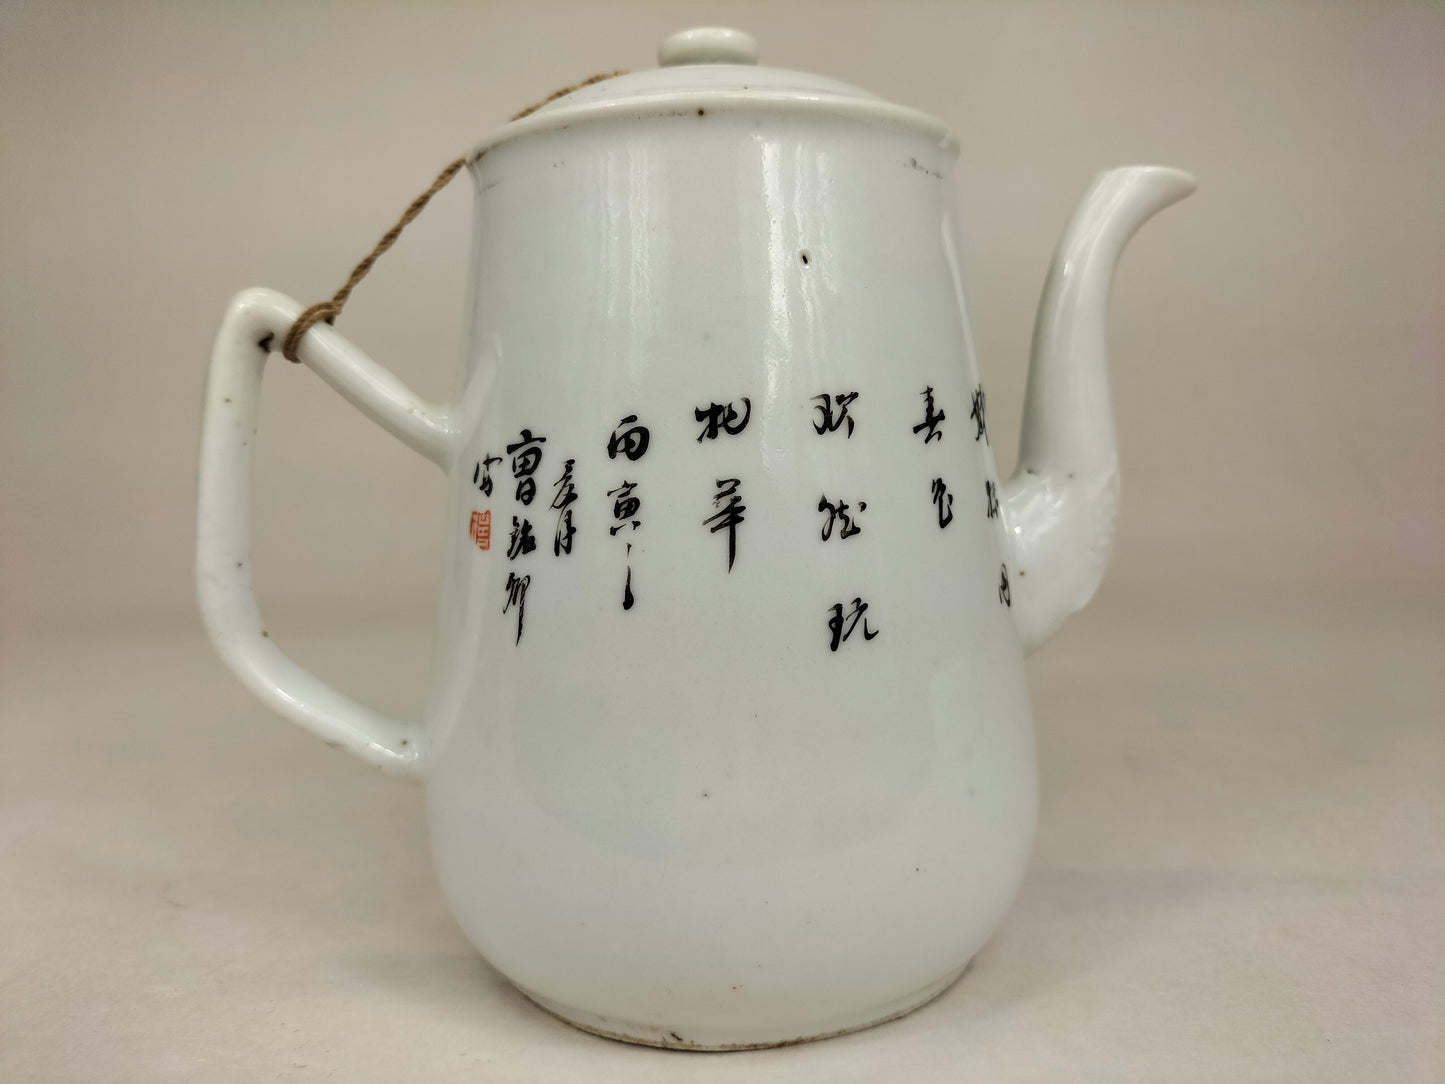 Antique Chinese teapot decorated with a garden scene // Republic Period (1912-1949)